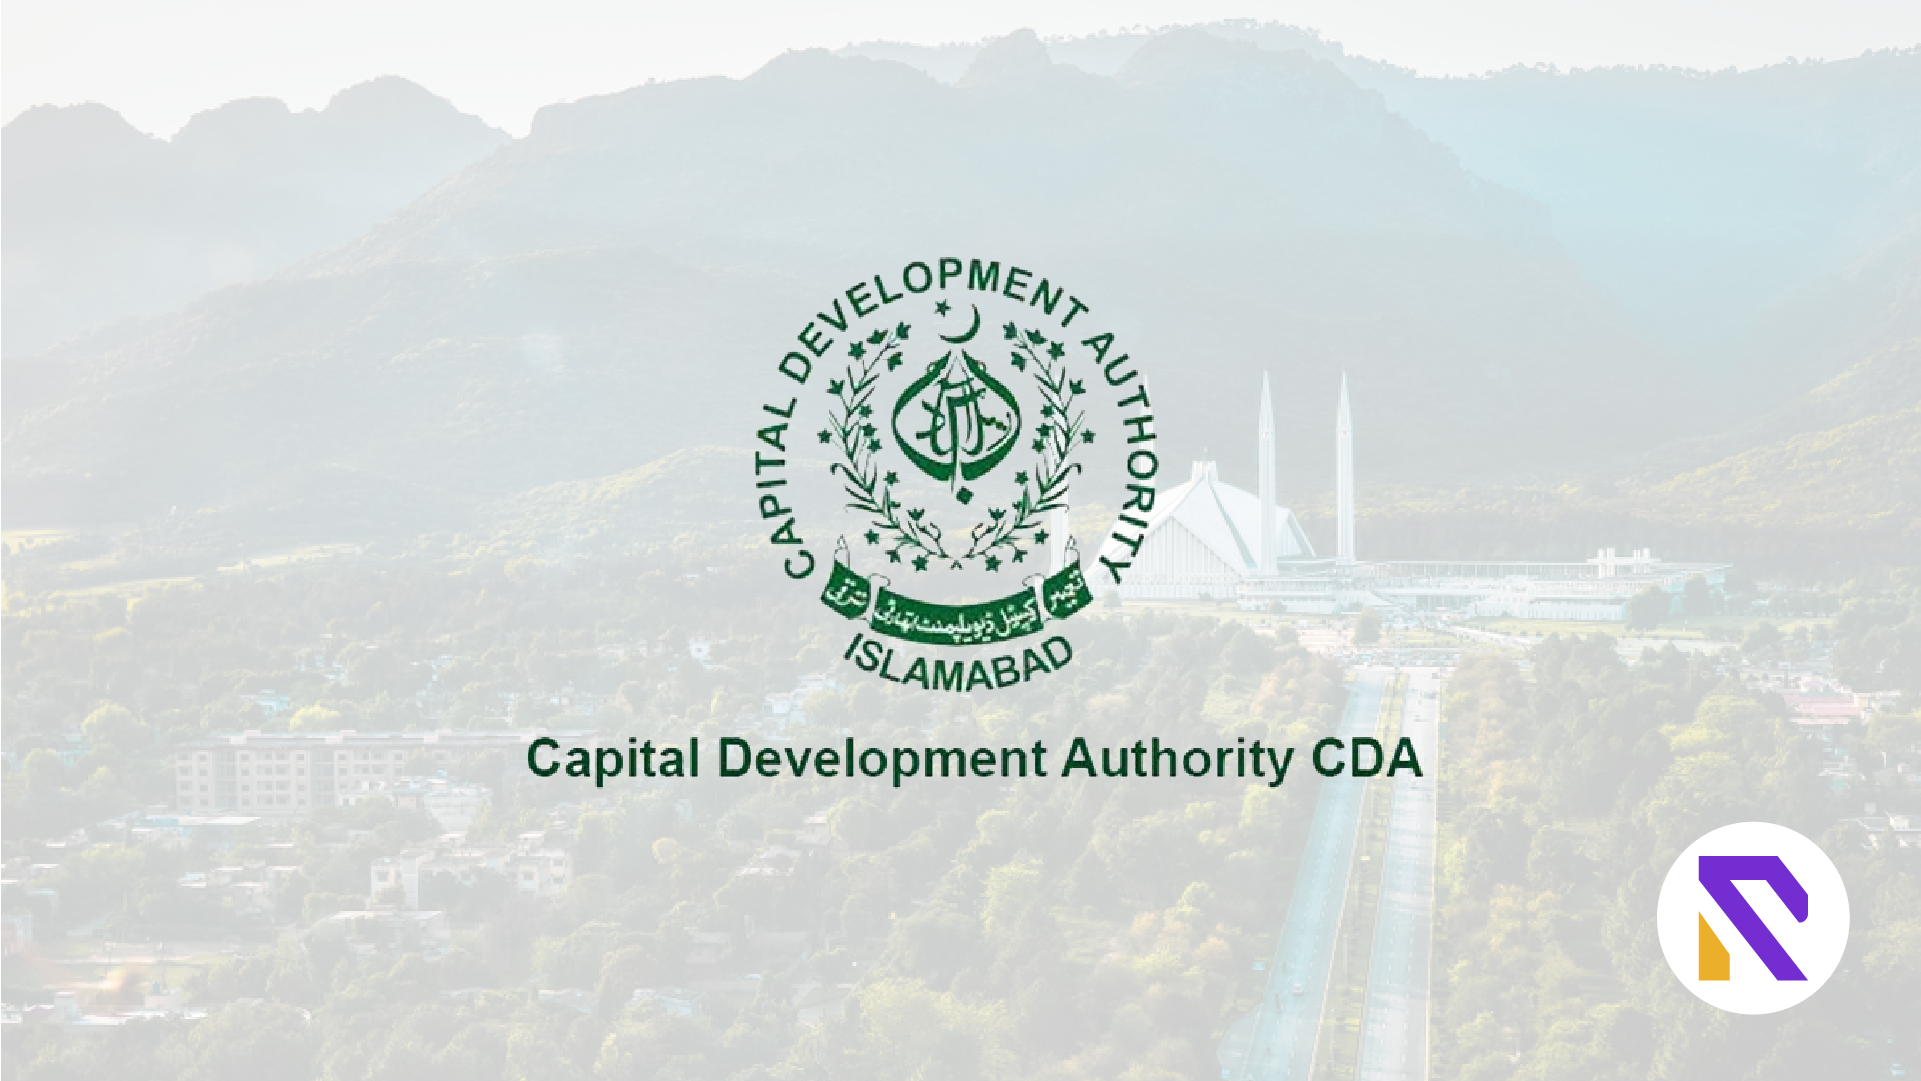 CDA Establishes Four Committees to Address Concerns of Citizens and Investors-Realtorspk